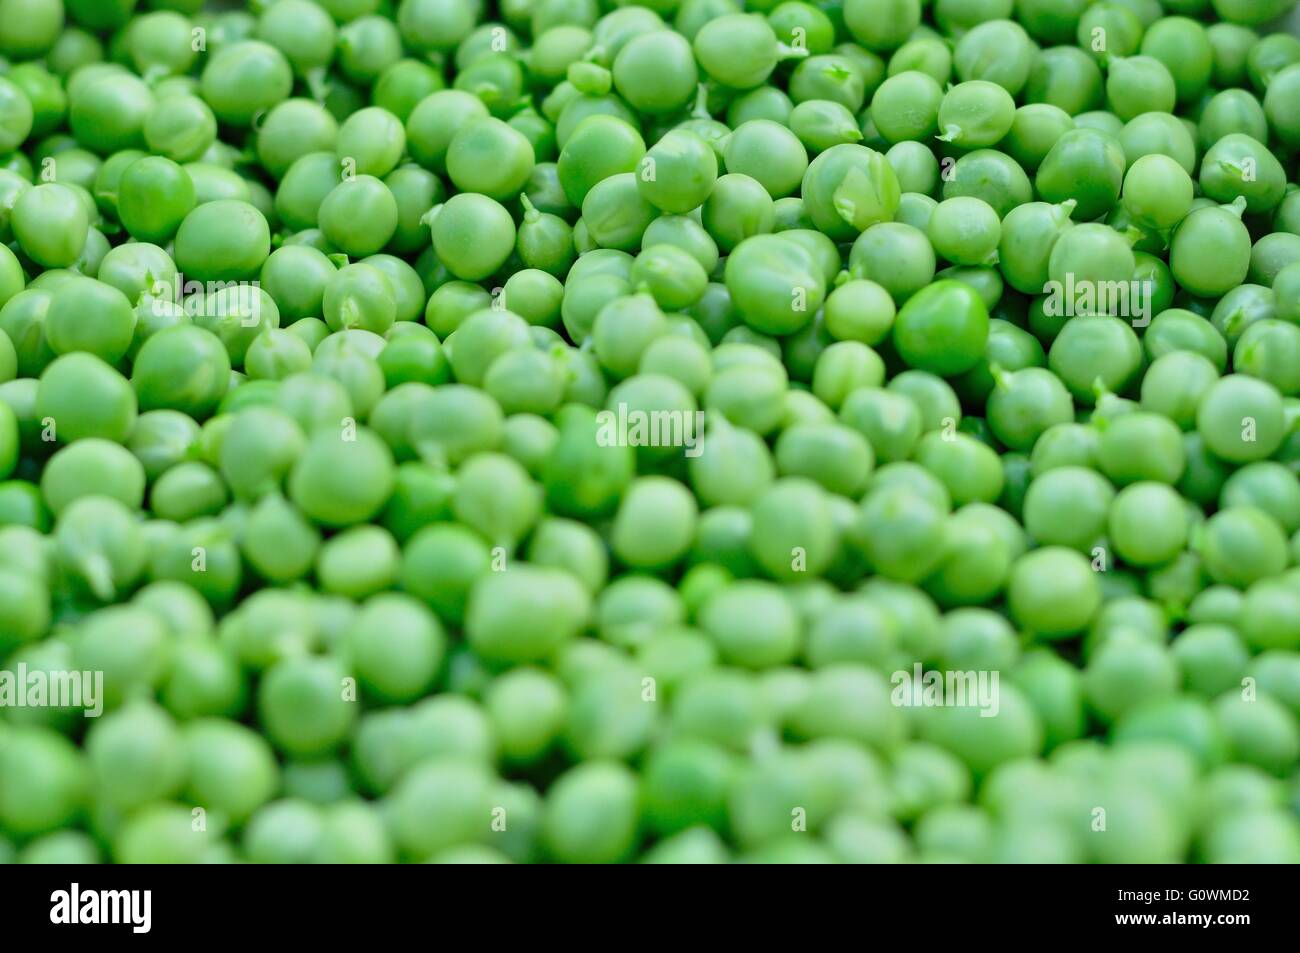 Texture of fresh green peas. Food background. Selective focus. Stock Photo